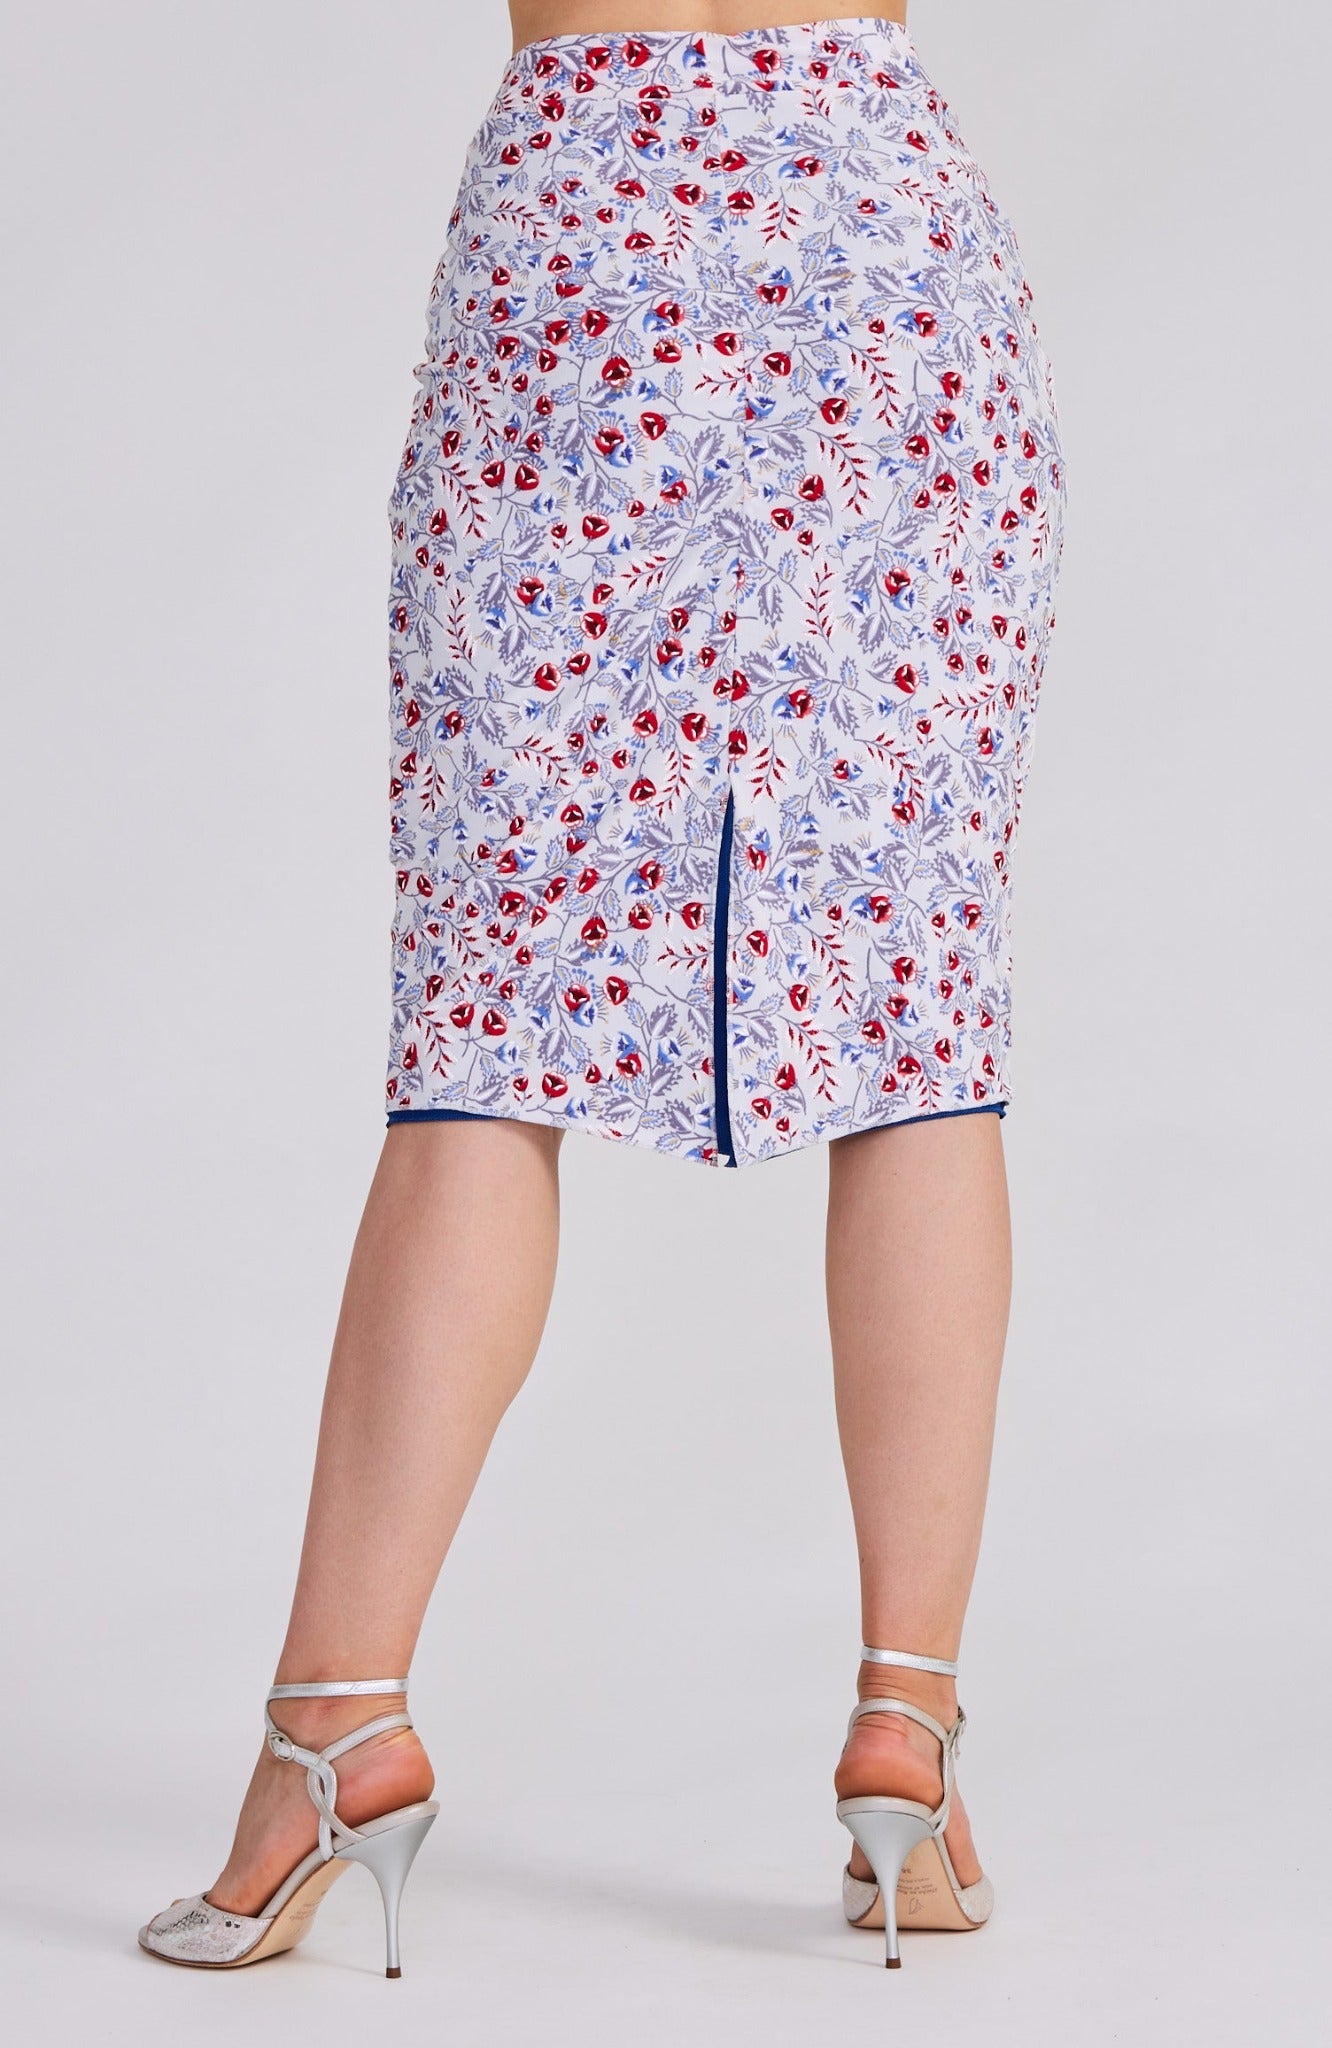 reversible tango skirt in summer florals on white